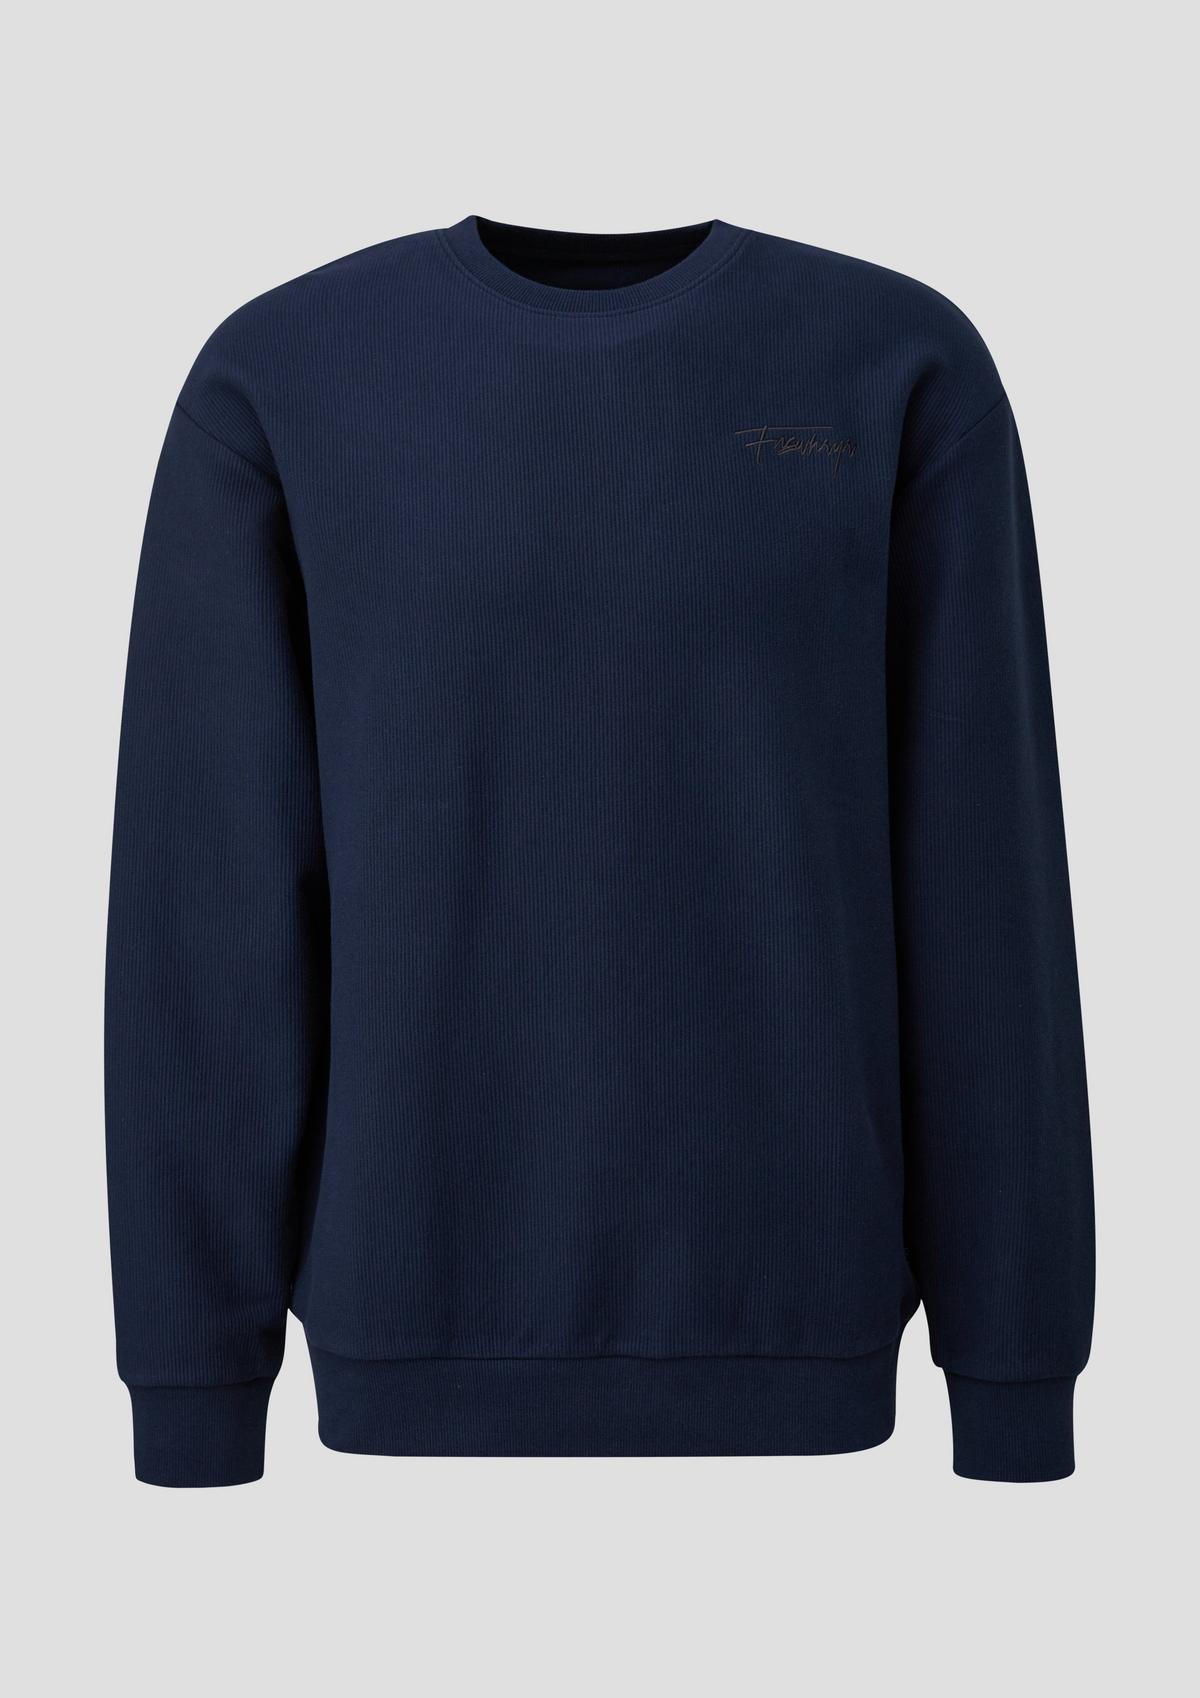 s.Oliver Sweatshirt with a ribbed texture